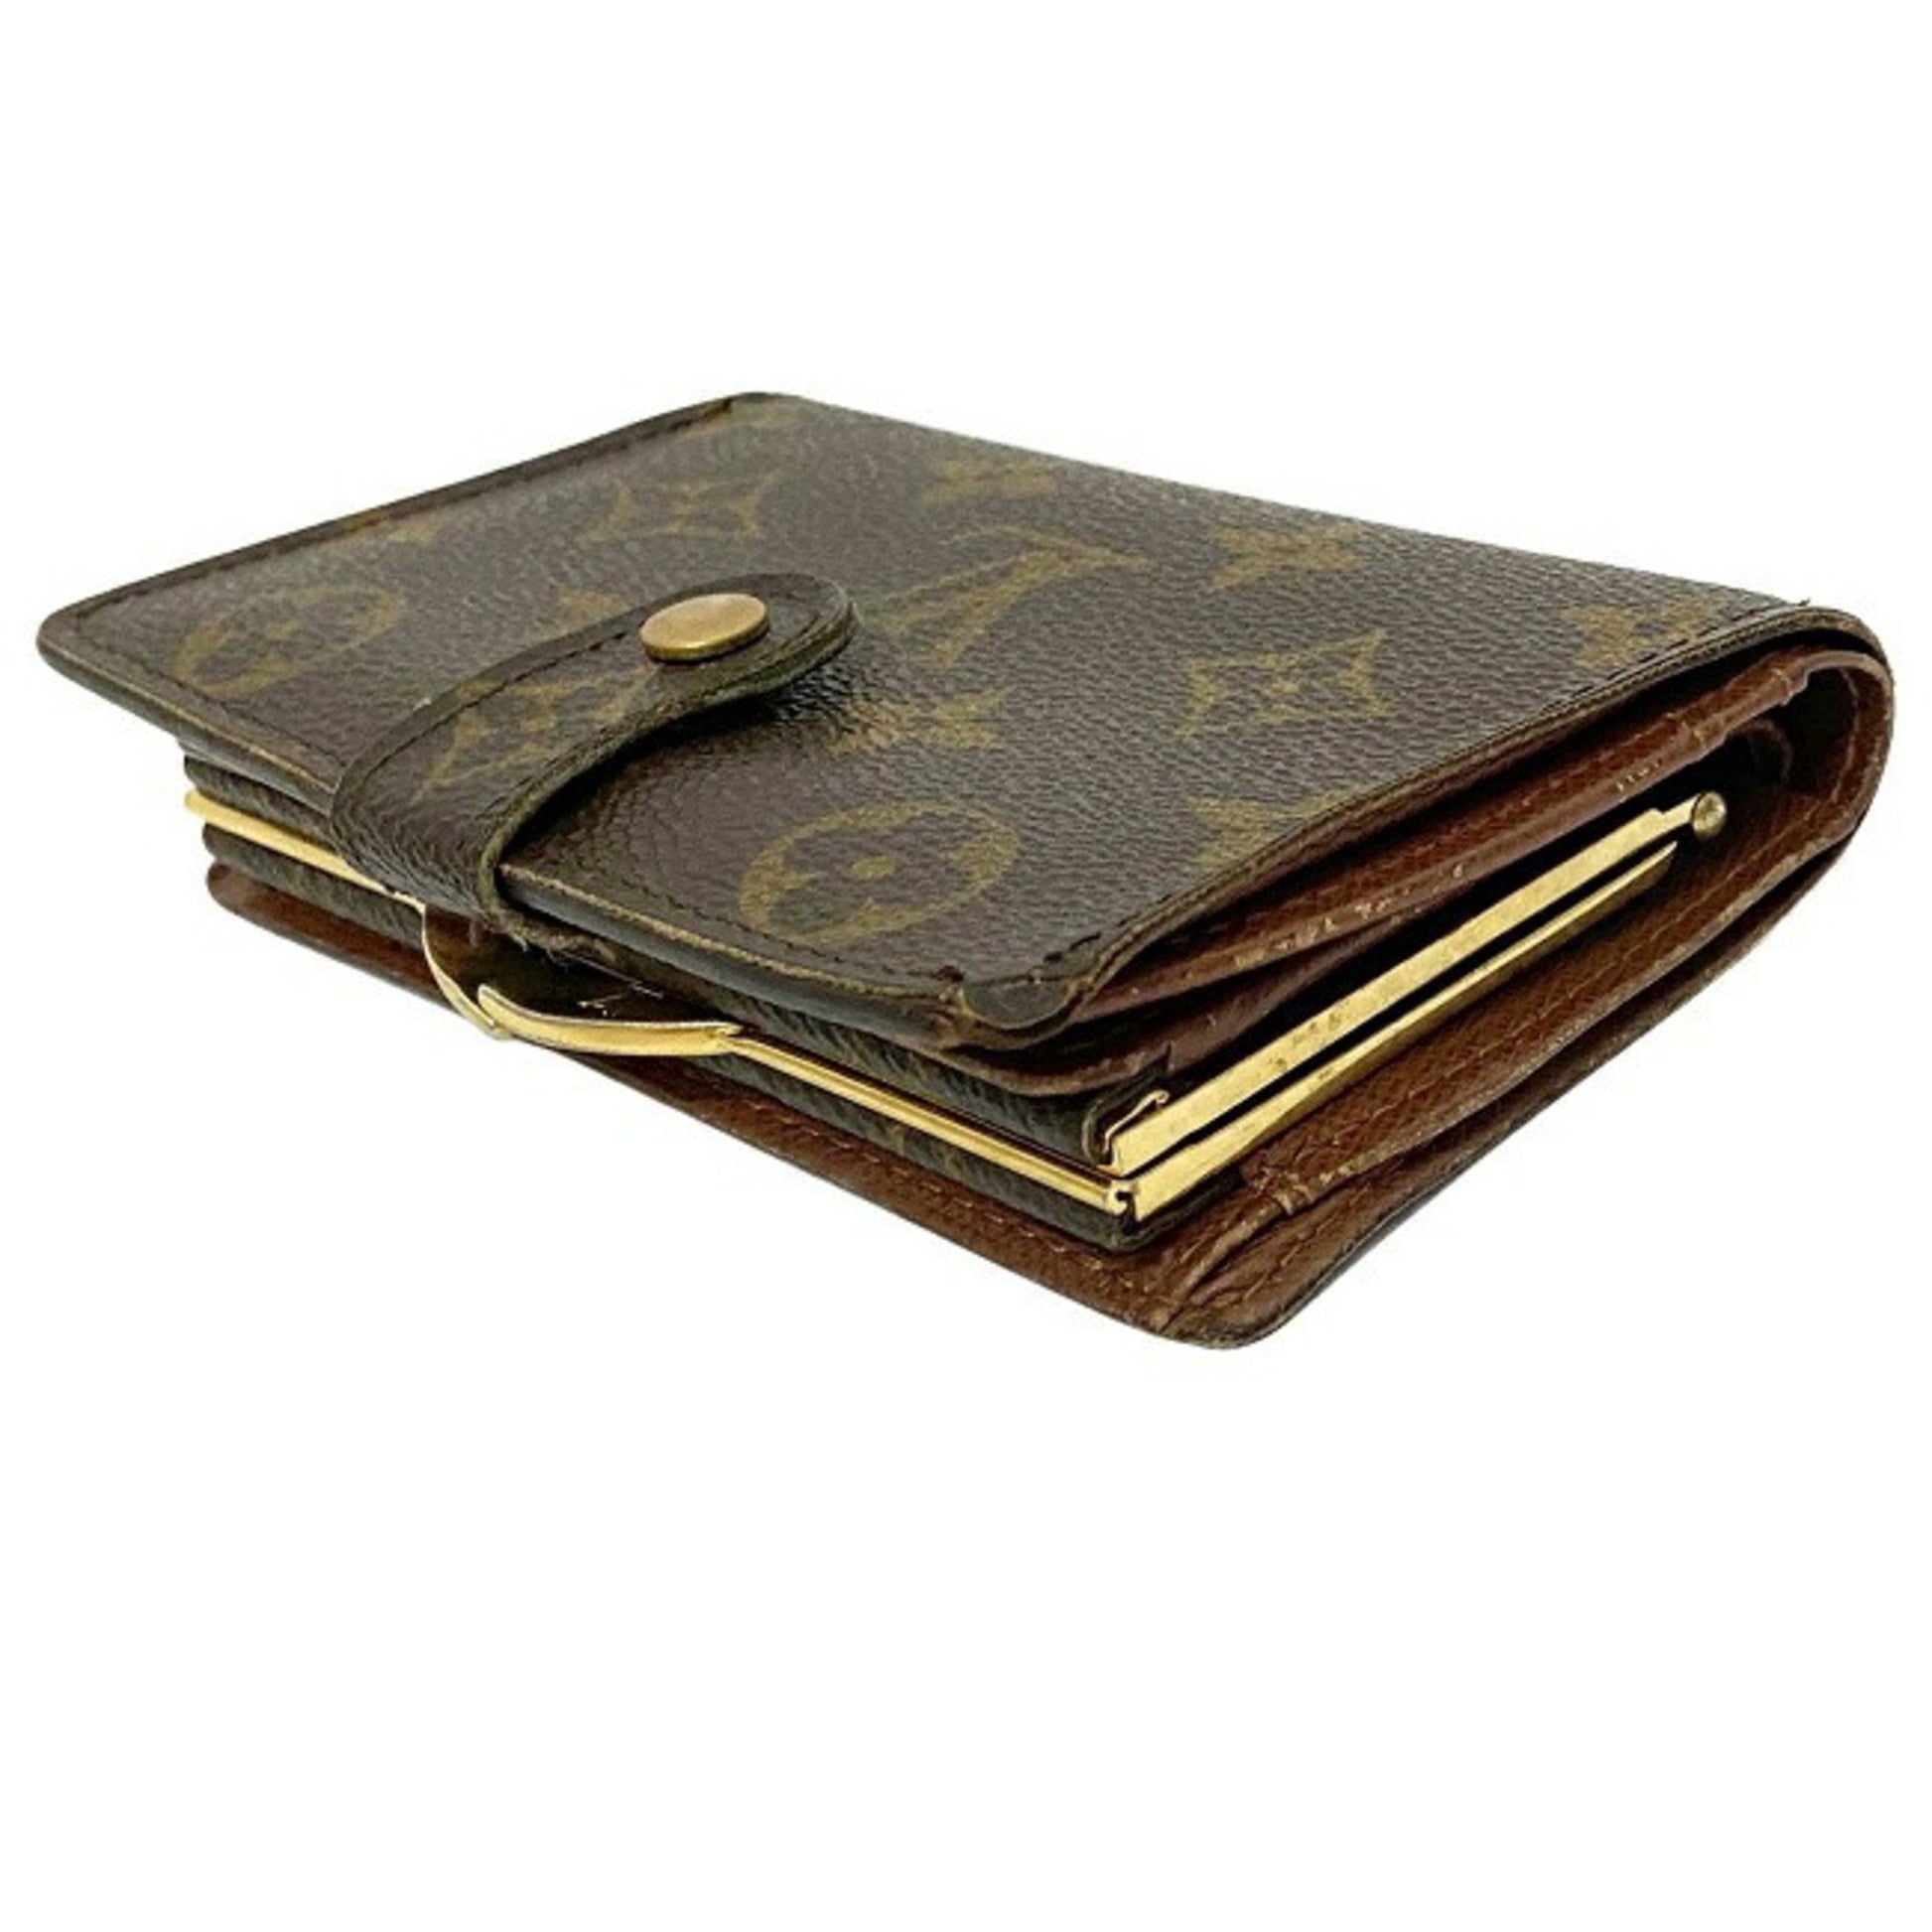 Buy [Used] LOUIS VUITTON Portefeuille Viennois Bifold Wallet Monogram  M61674 from Japan - Buy authentic Plus exclusive items from Japan